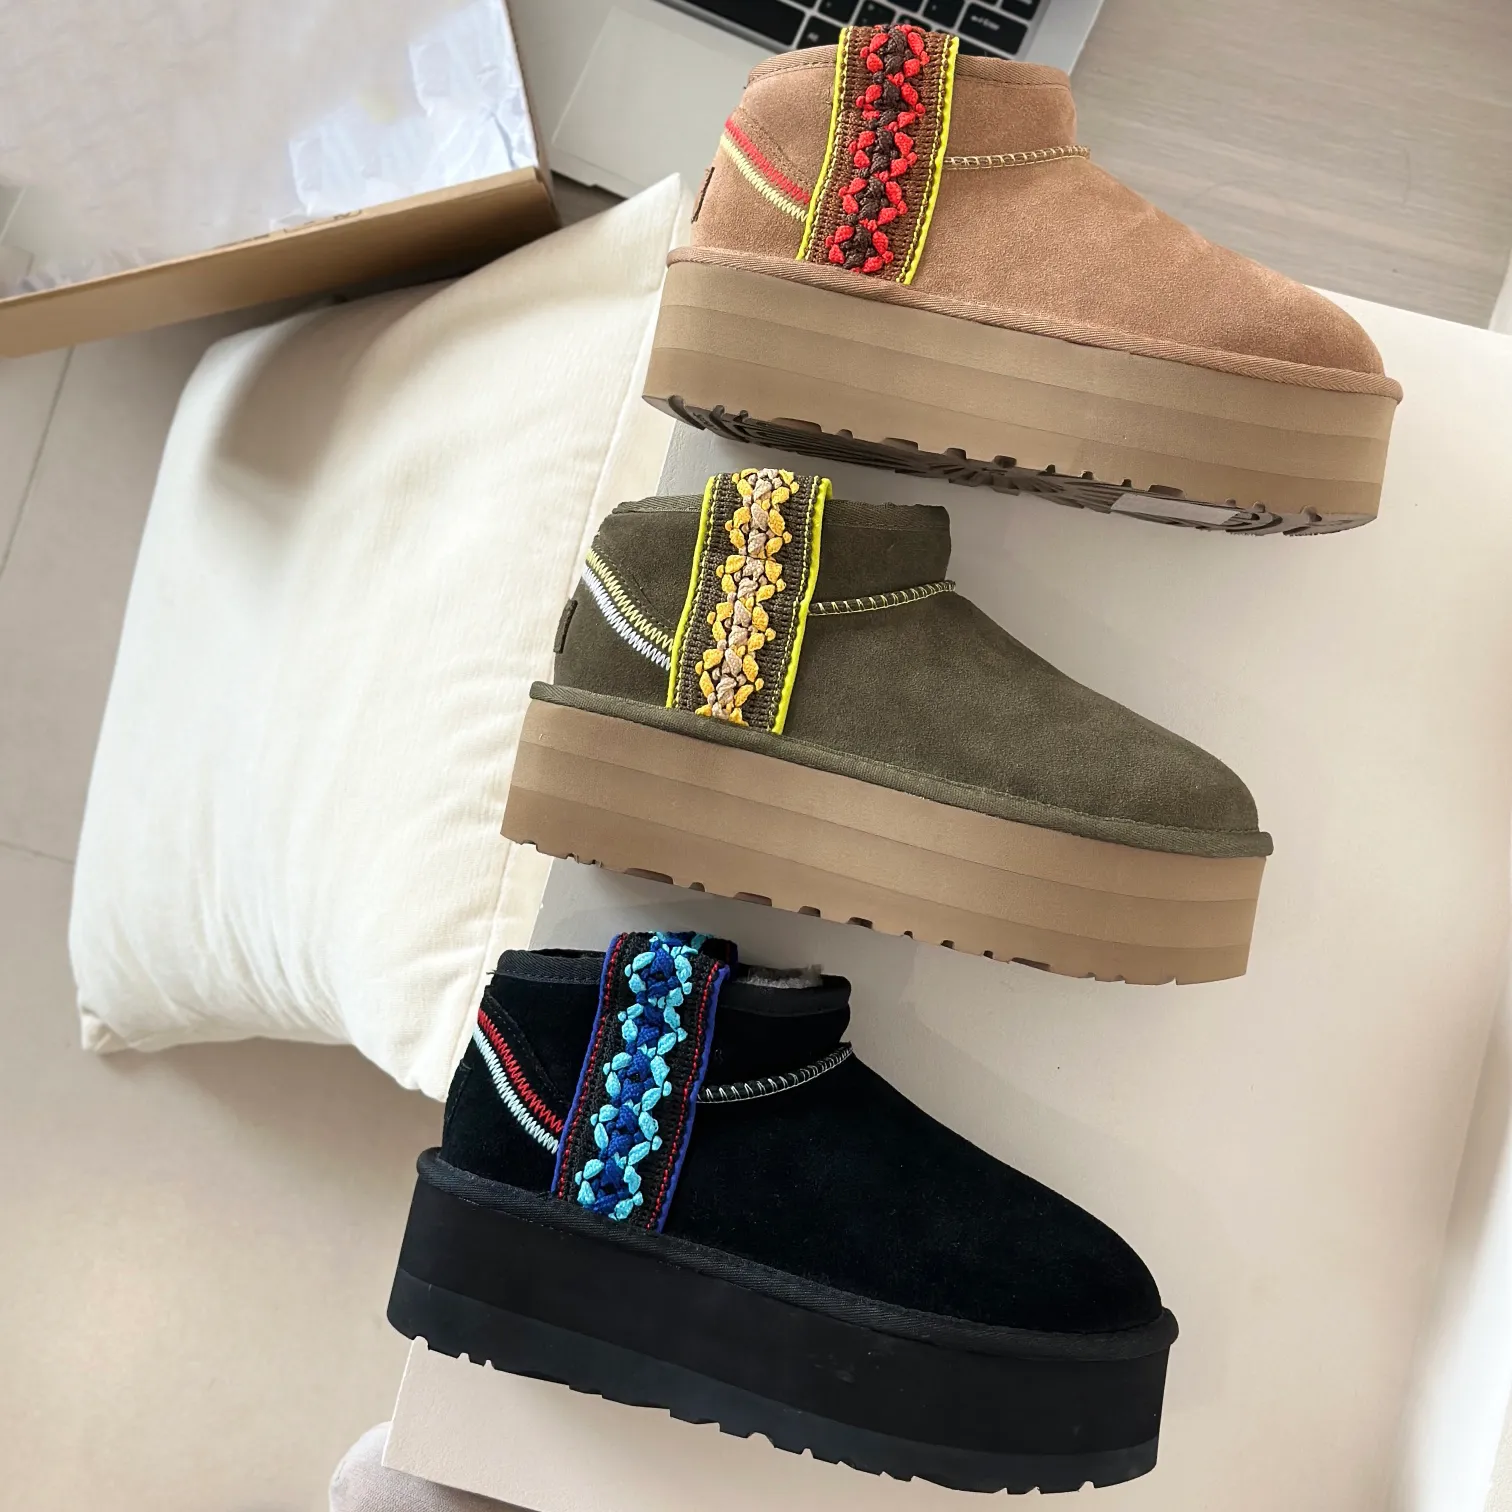 Famous designer shoes Thick-soled mini weave Ambience Vintage Suede sheepskin Puffy winter mini boots Fur and shearling slippers Platform boots Suede sheepskin